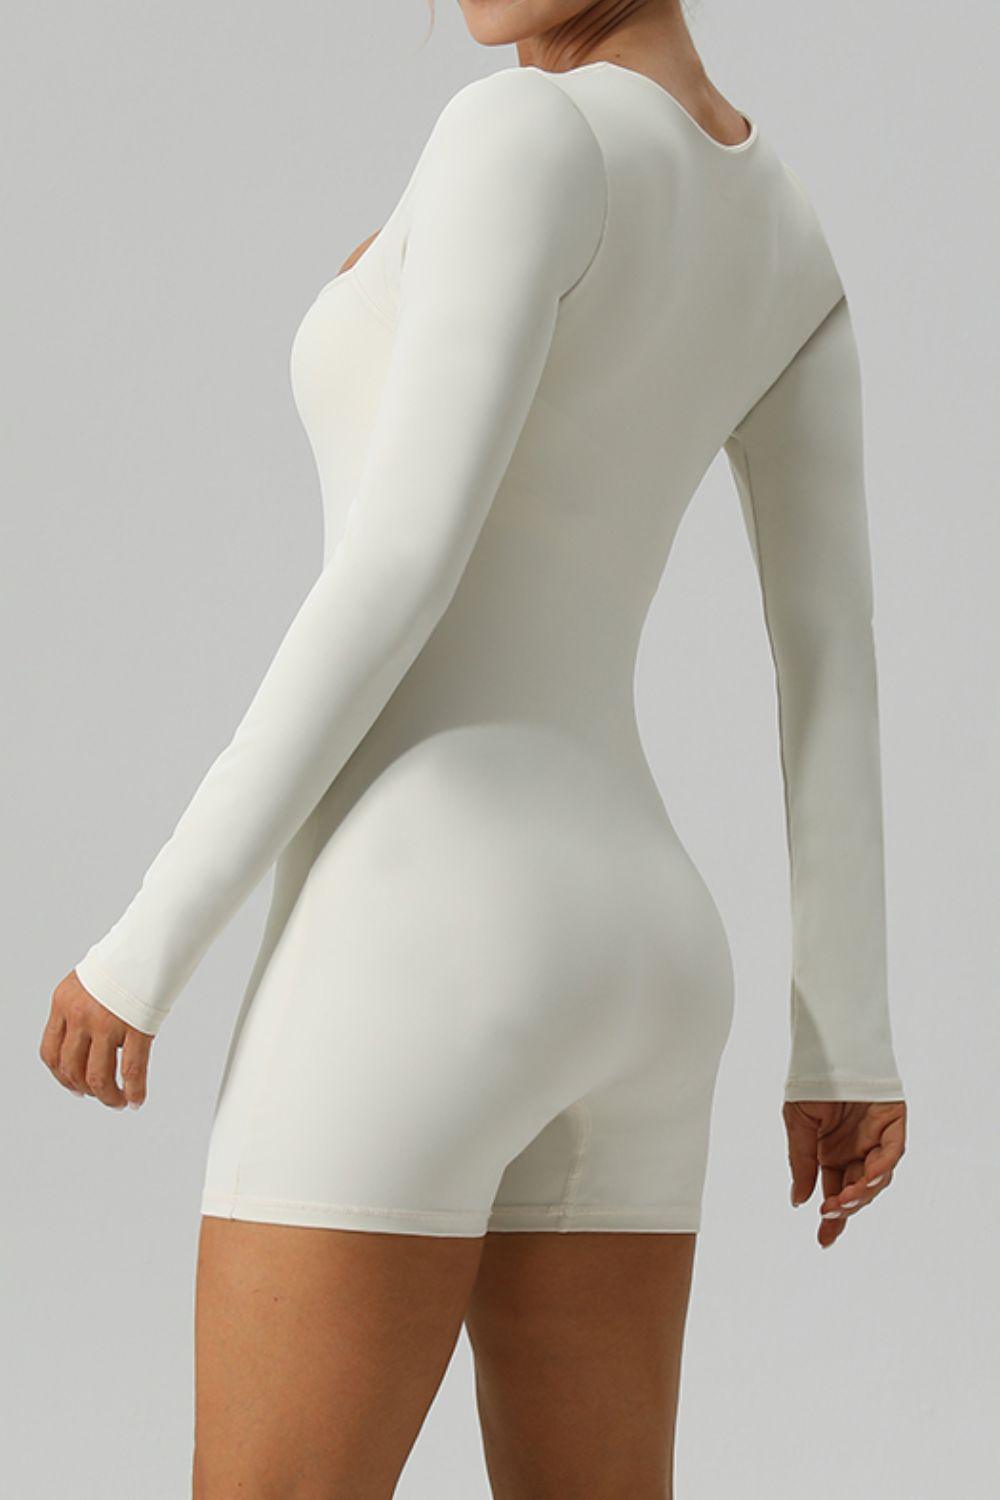 a woman in a white bodysuit posing for the camera